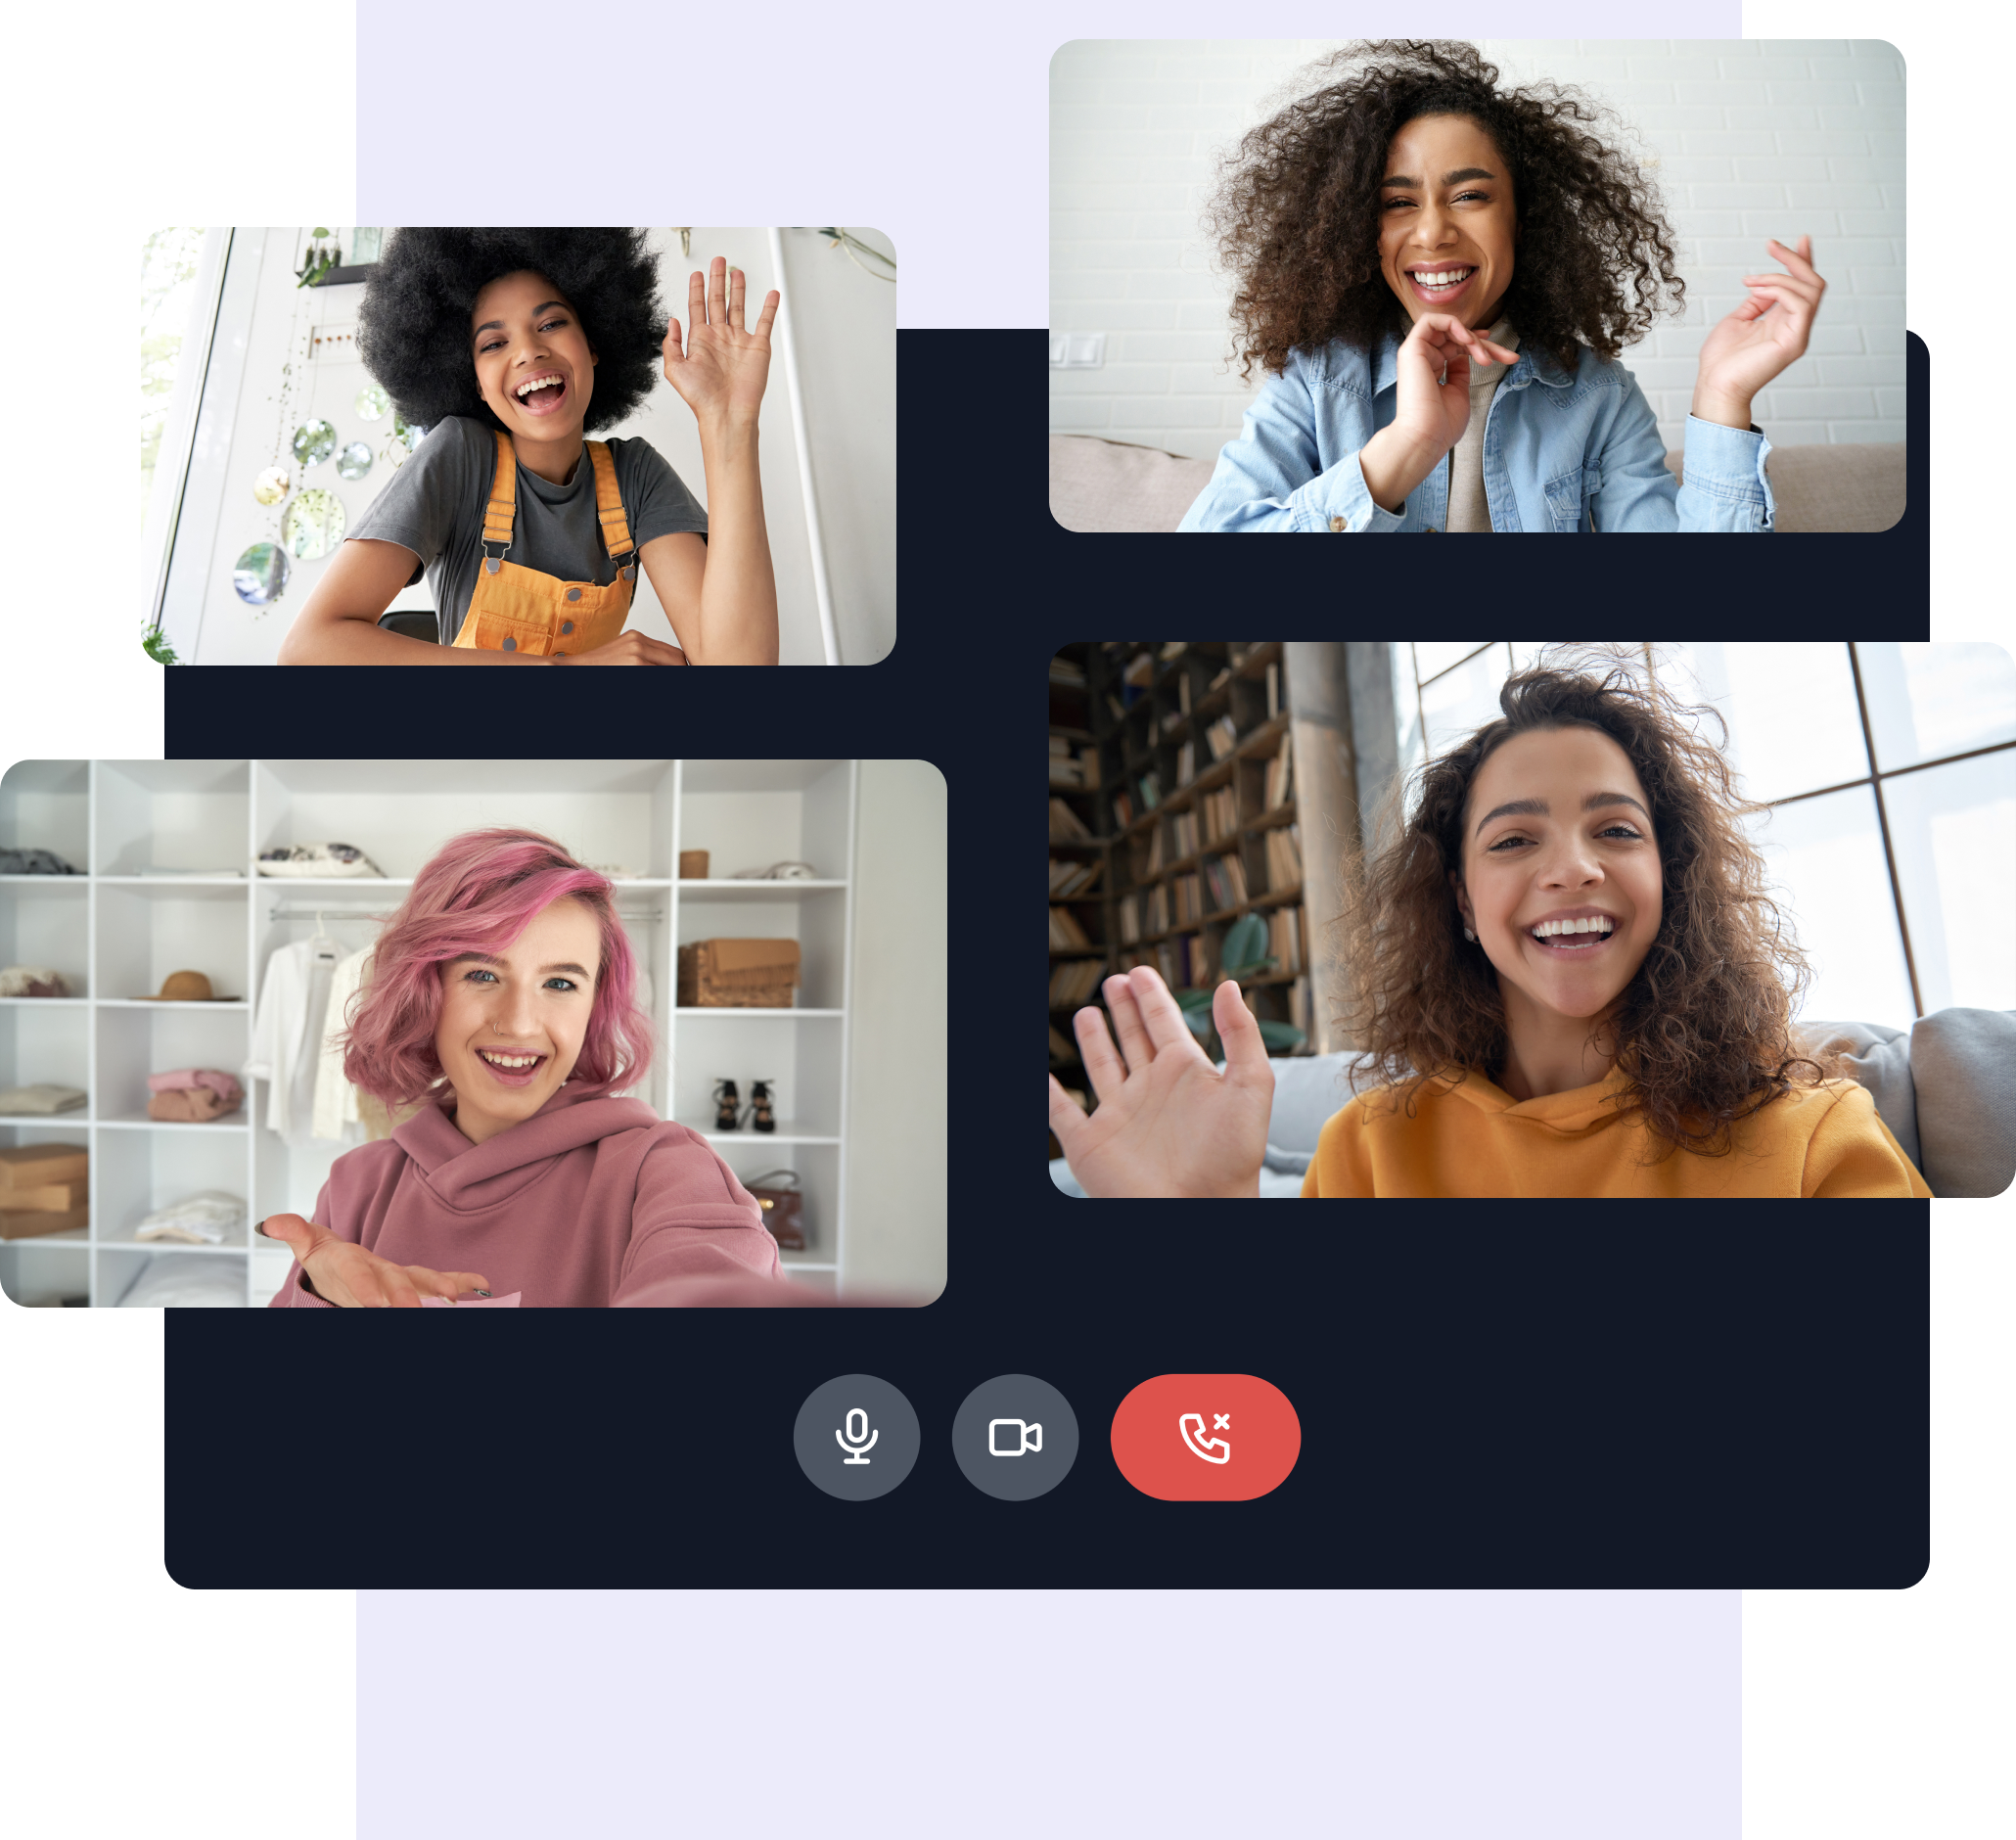 Speakers in a videocall